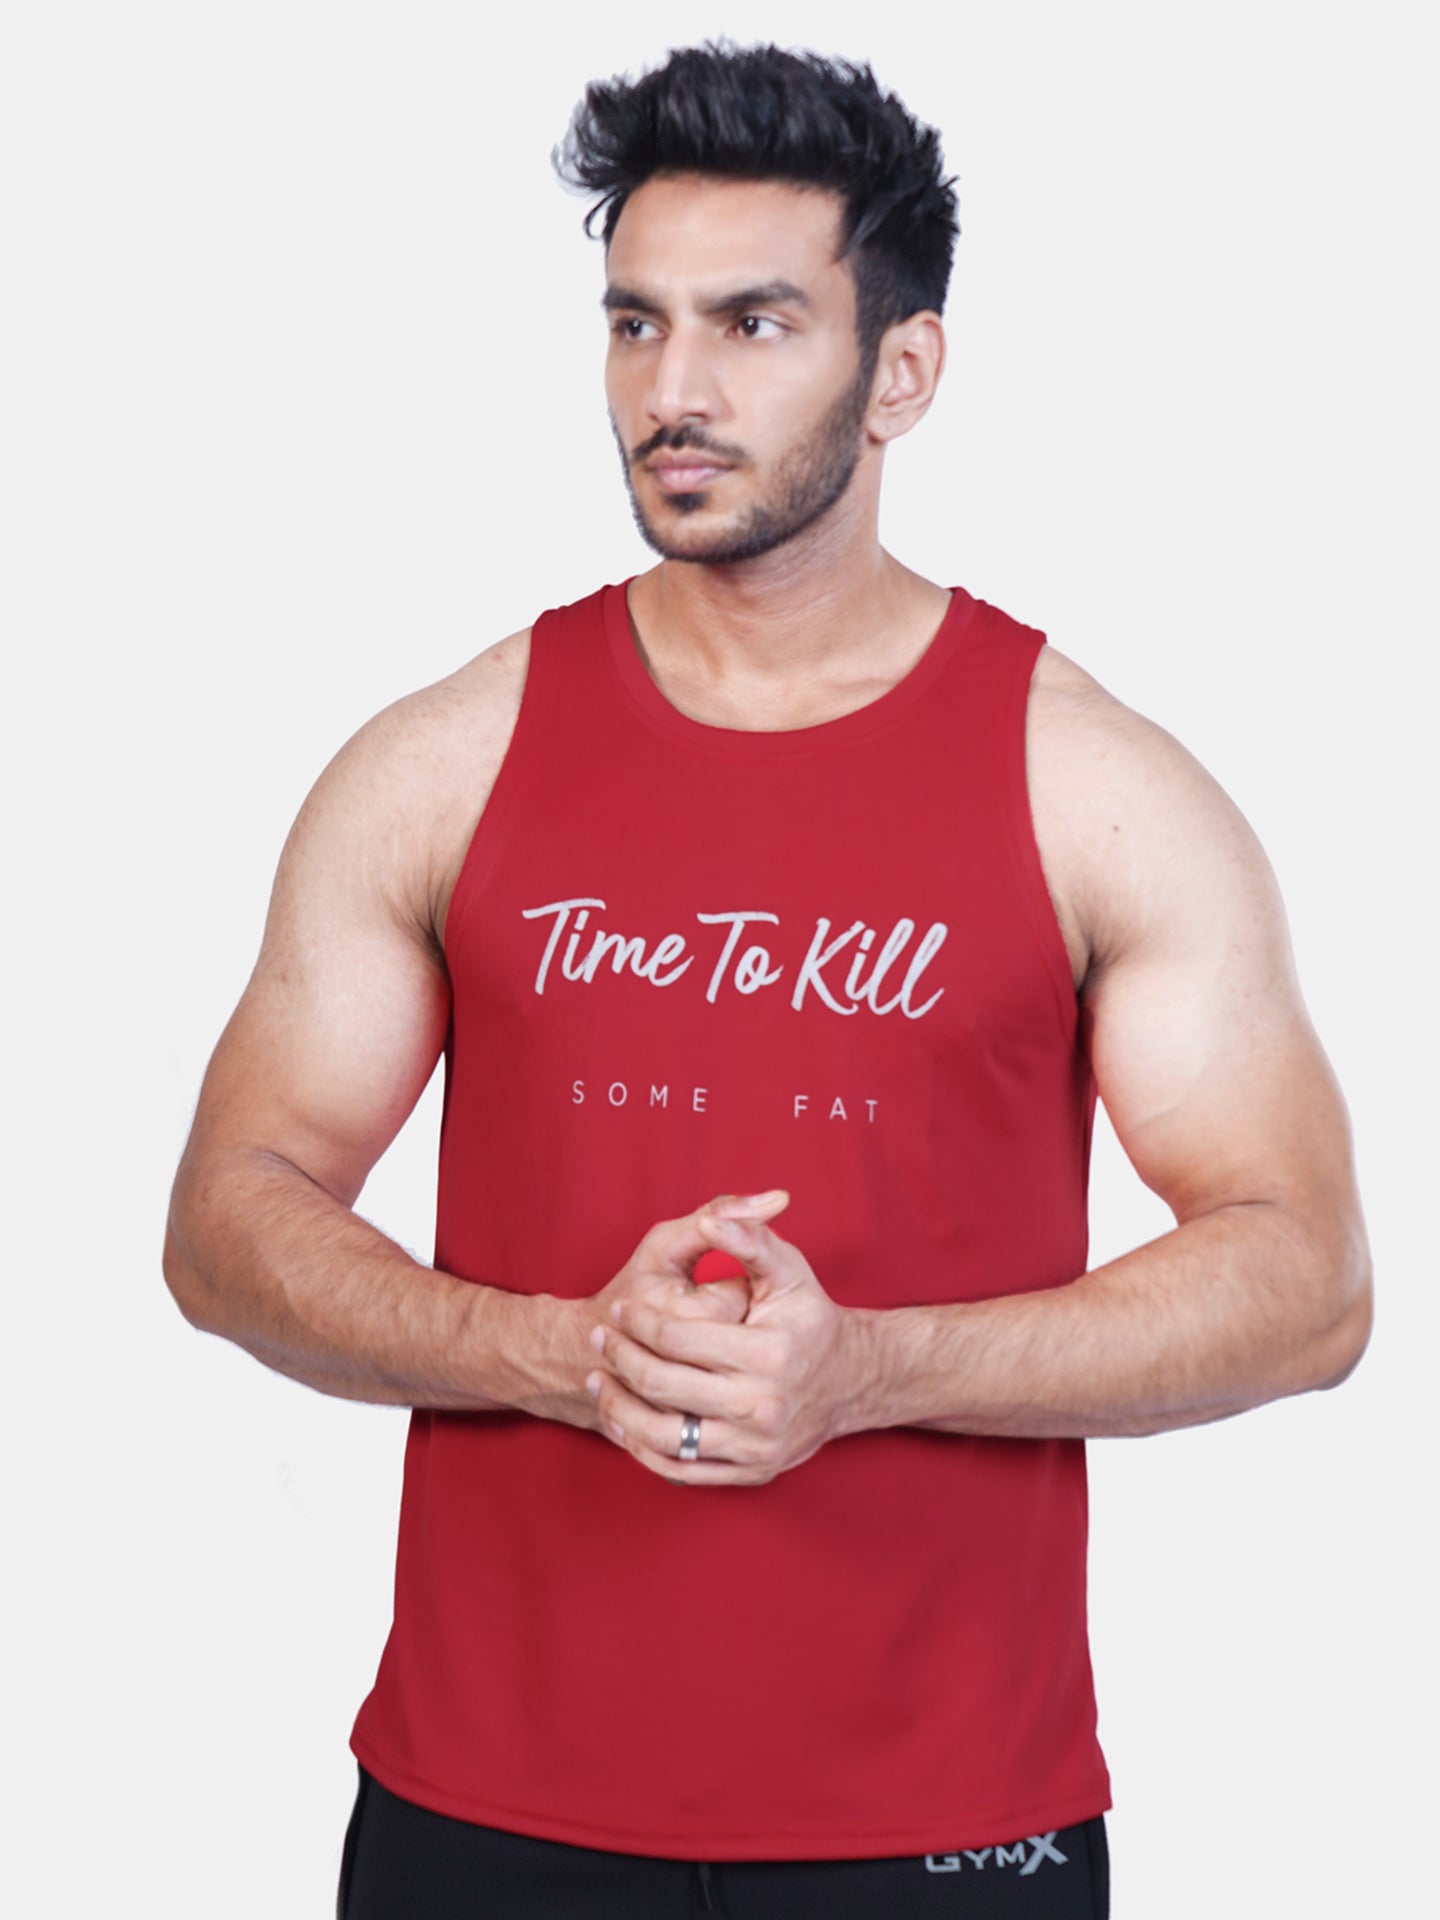 Ultra Lite GymX Red Tank: Time To Kill Some Fat - Sale